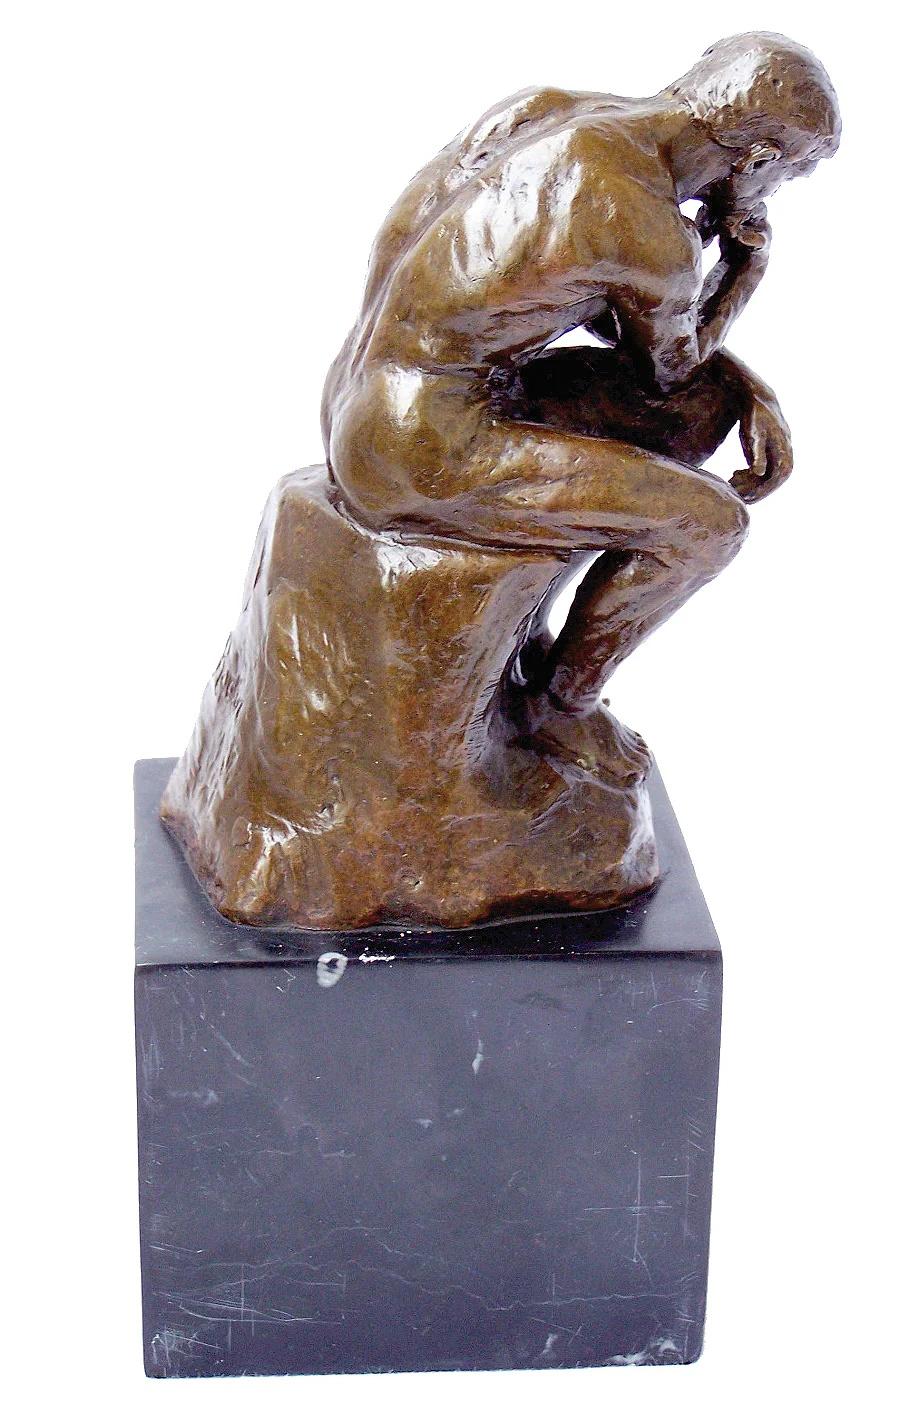 Sculpture, Bronze with brown patina representing The Thinker, model by Auguste Rodin, XXIst Century.

W: 17.5cm, H: 19.5cm, D: 10cm